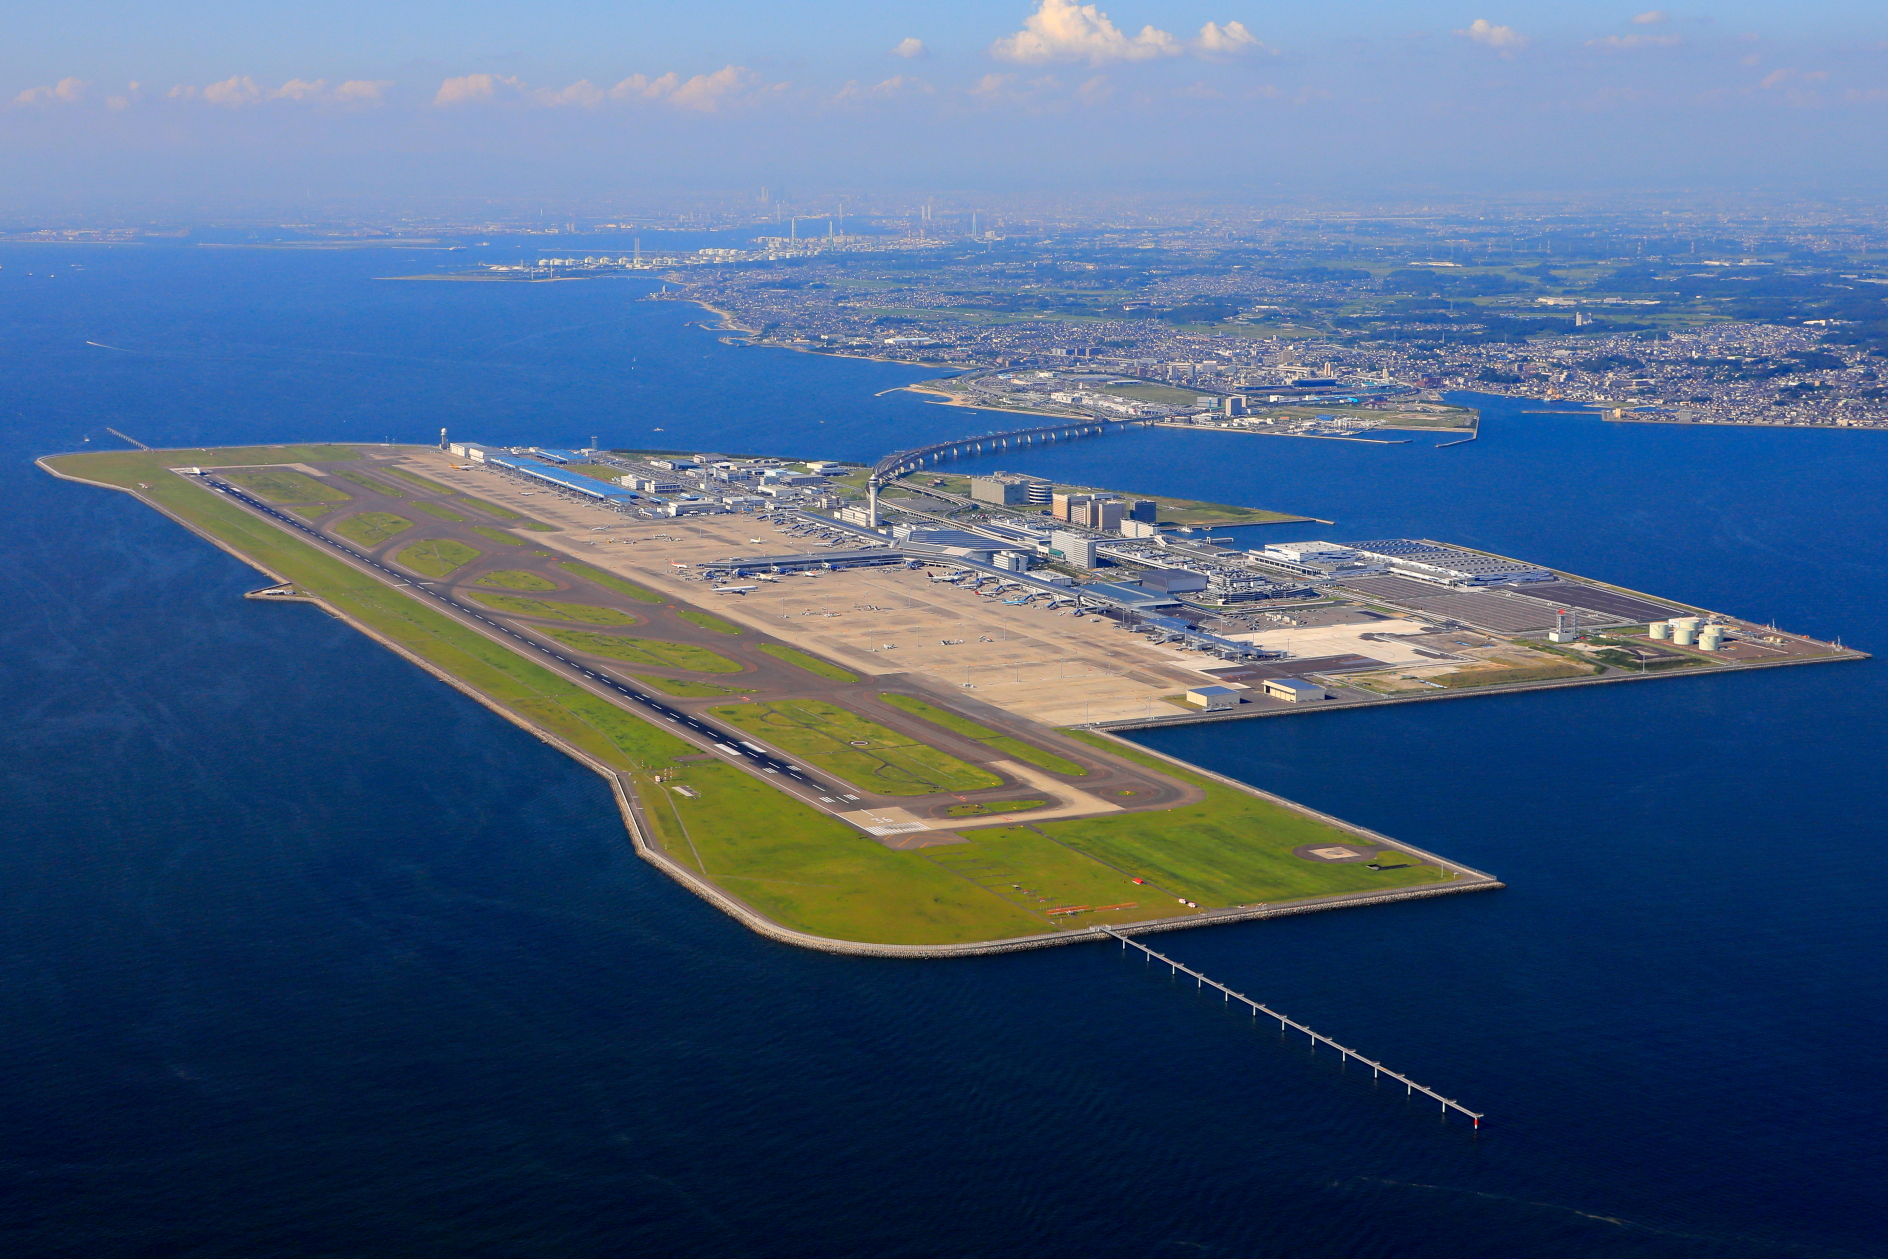 Inaugurated in 2005, Chubu Centrair International Airport (NGO) was constructed on an artificial island in Ise Bay, 35km south of Nagoya in central Japan. It handles approximately 13 million travellers from around the world annually. Click to enlarge.